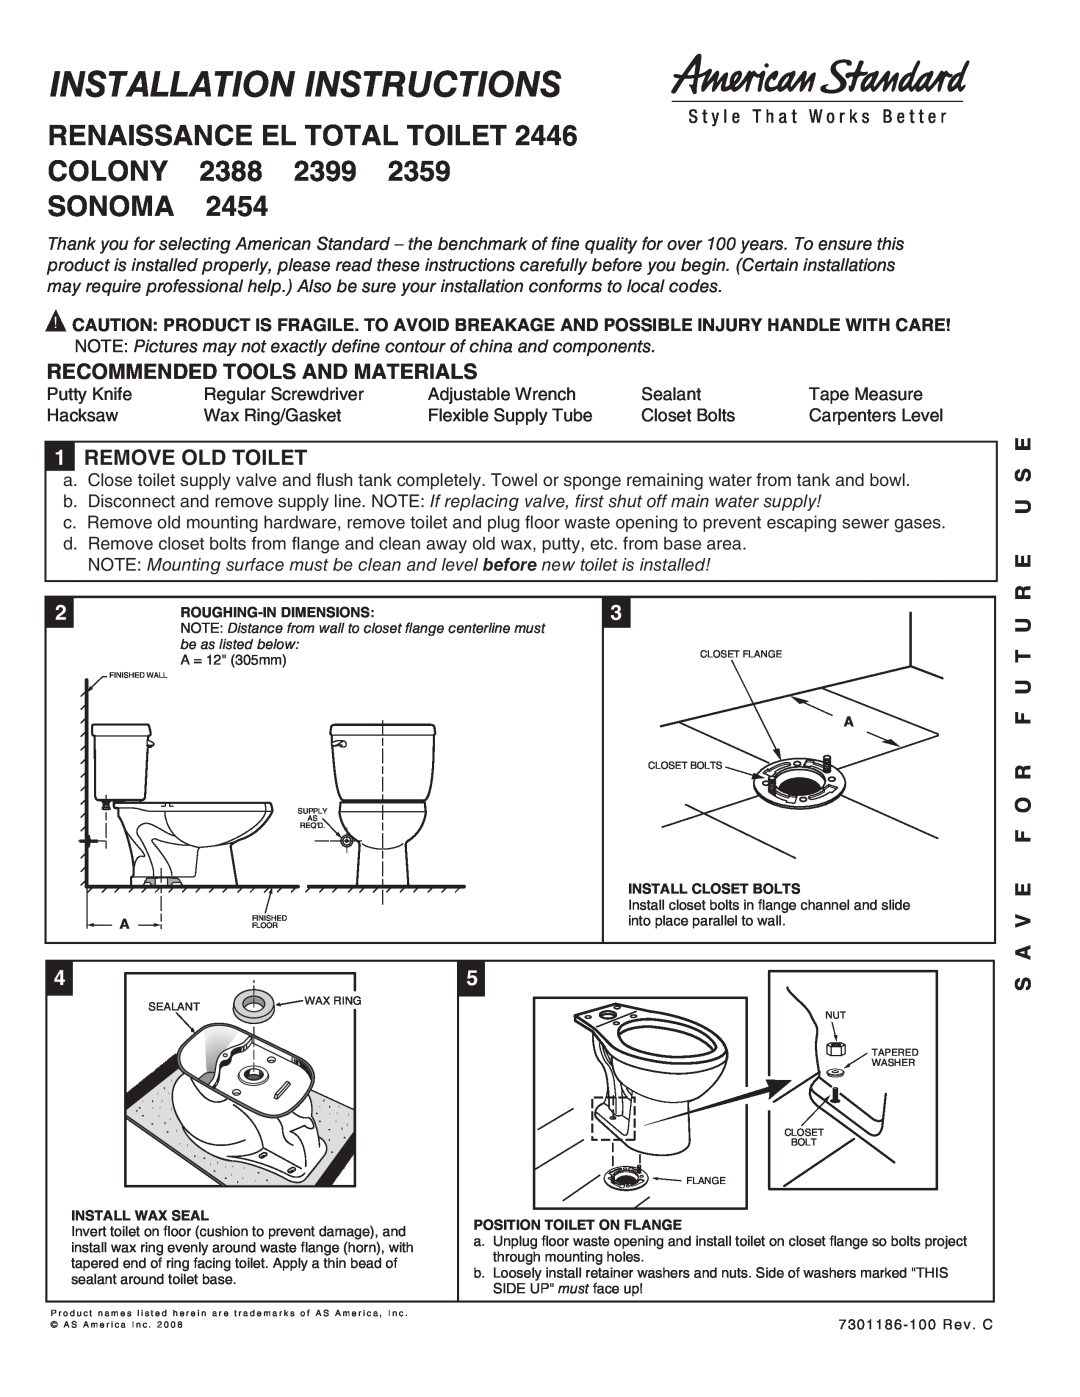 American Standard 2446 installation instructions Recommended Tools And Materials, 1REMOVE OLD TOILET, Sonoma 